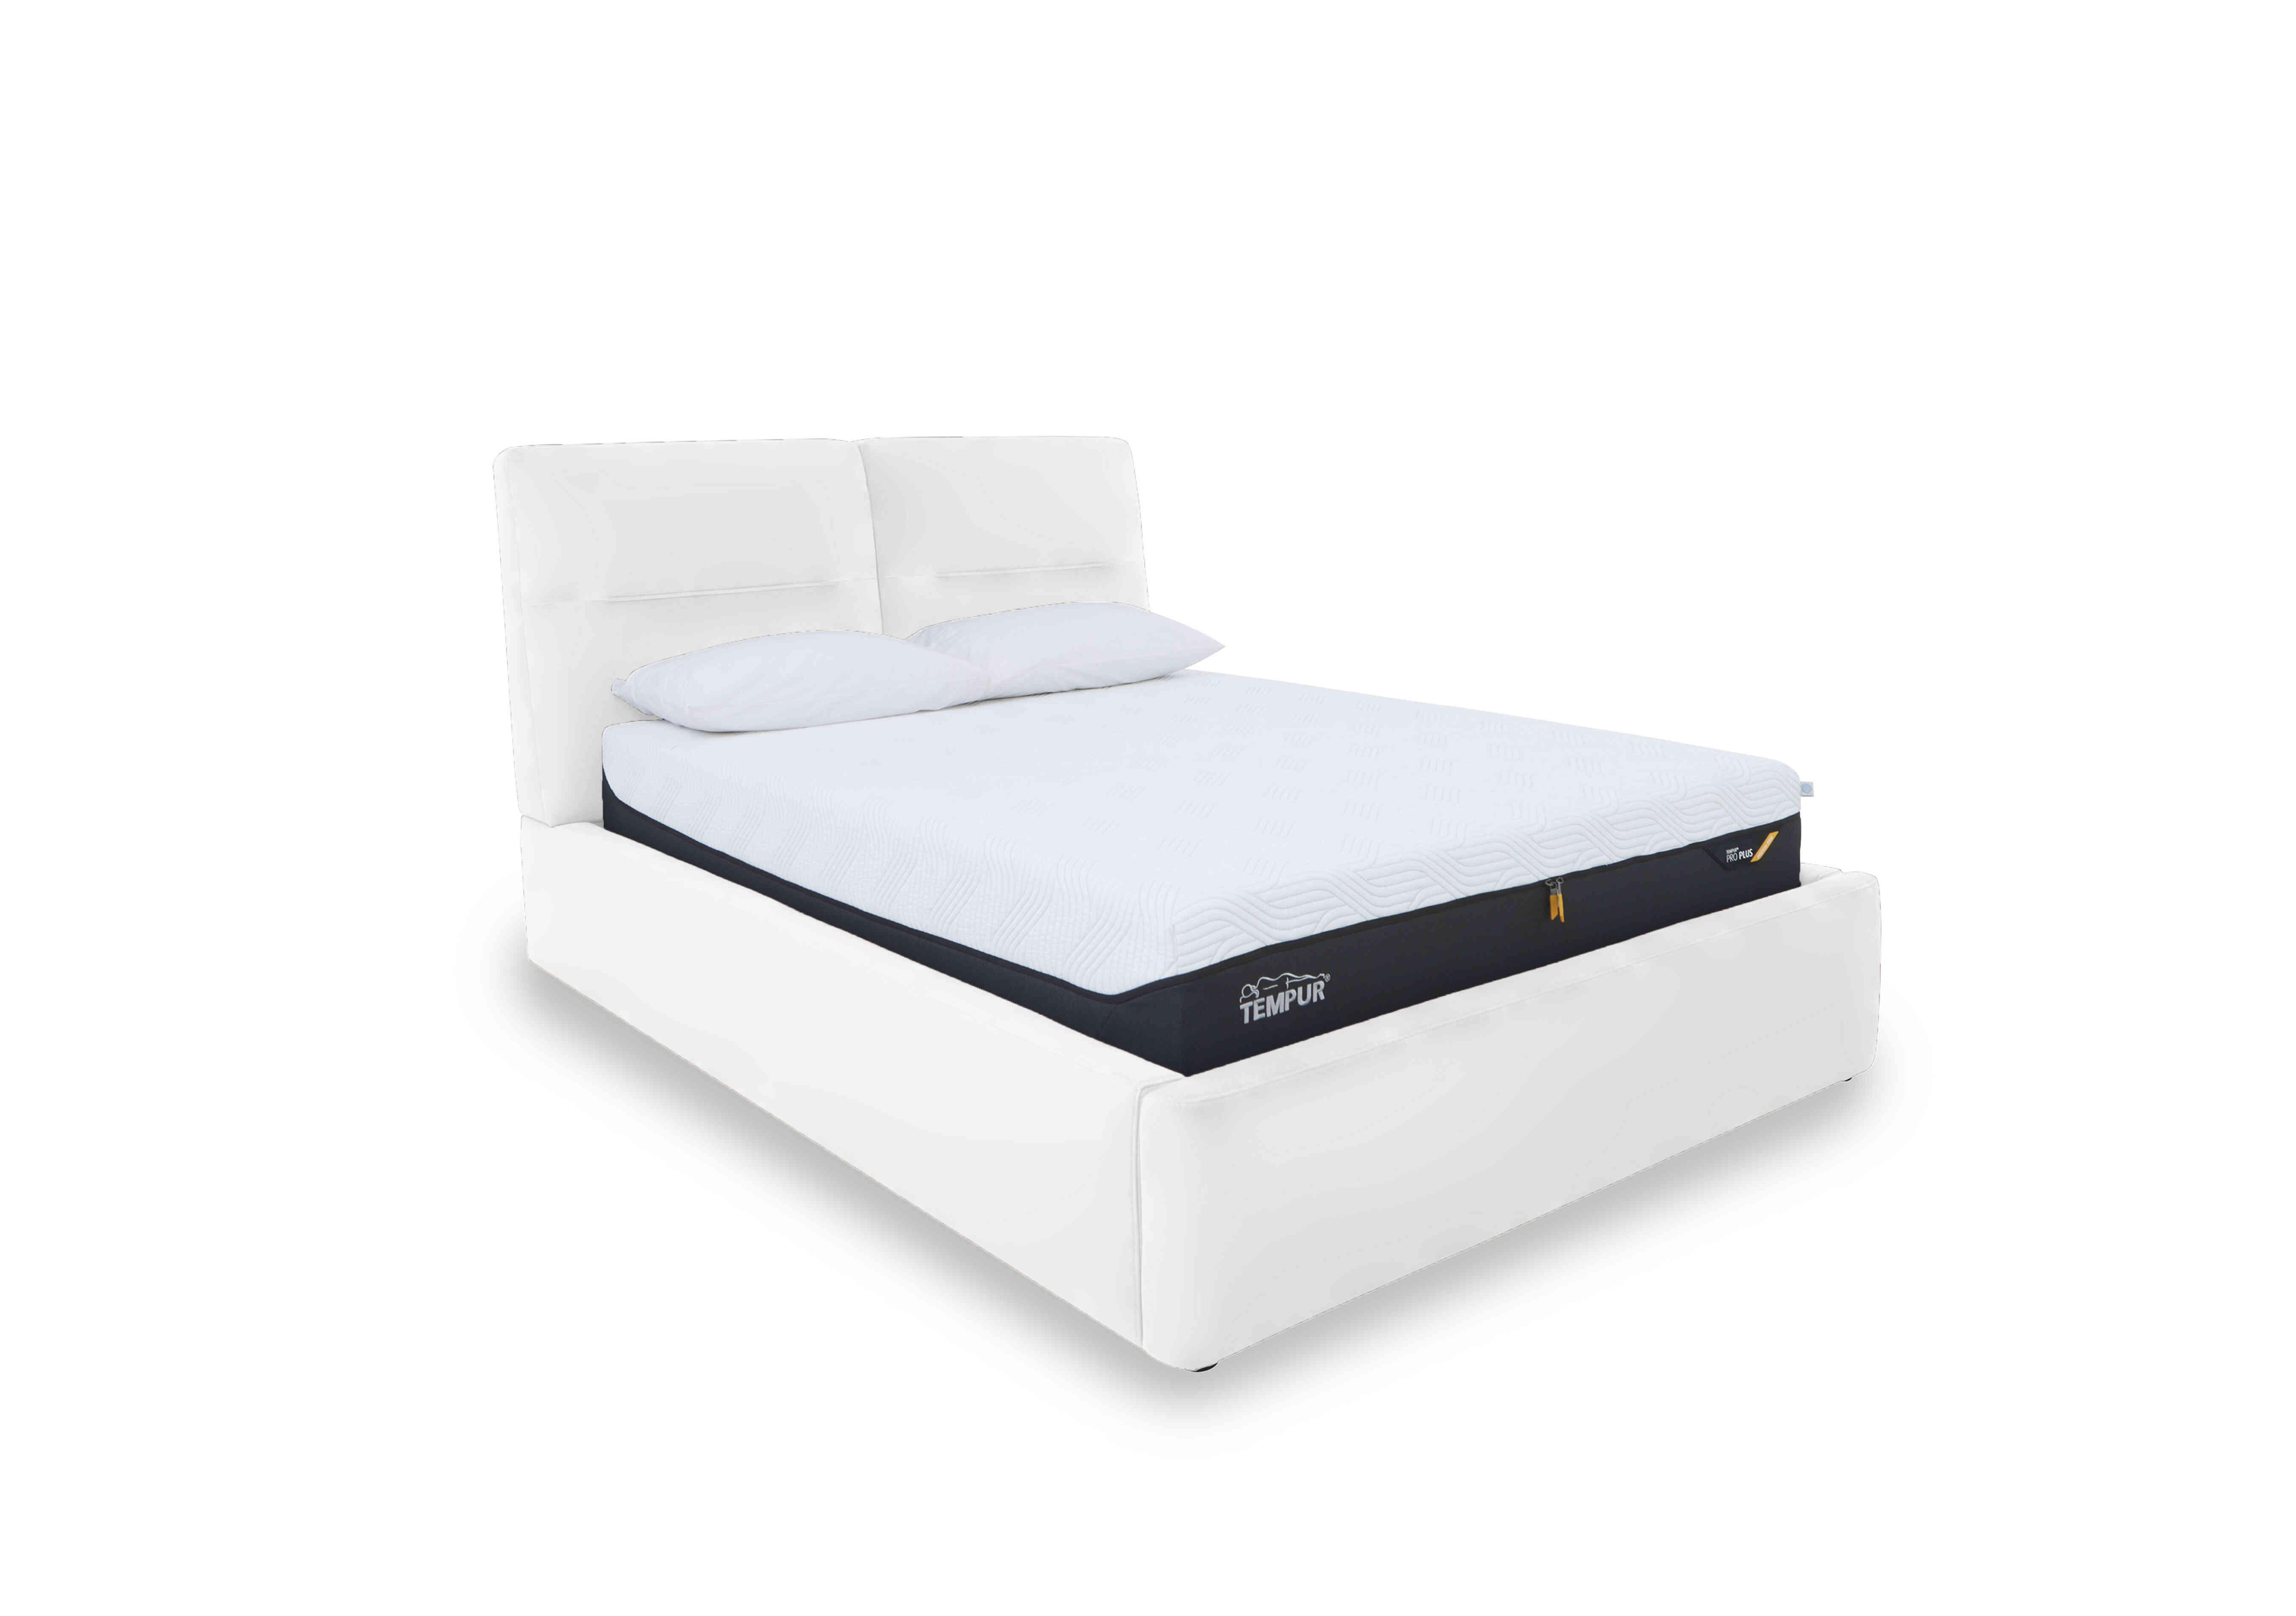 Stark Leather Manual Ottoman Bed Frame in Bv-744d Star White on Furniture Village